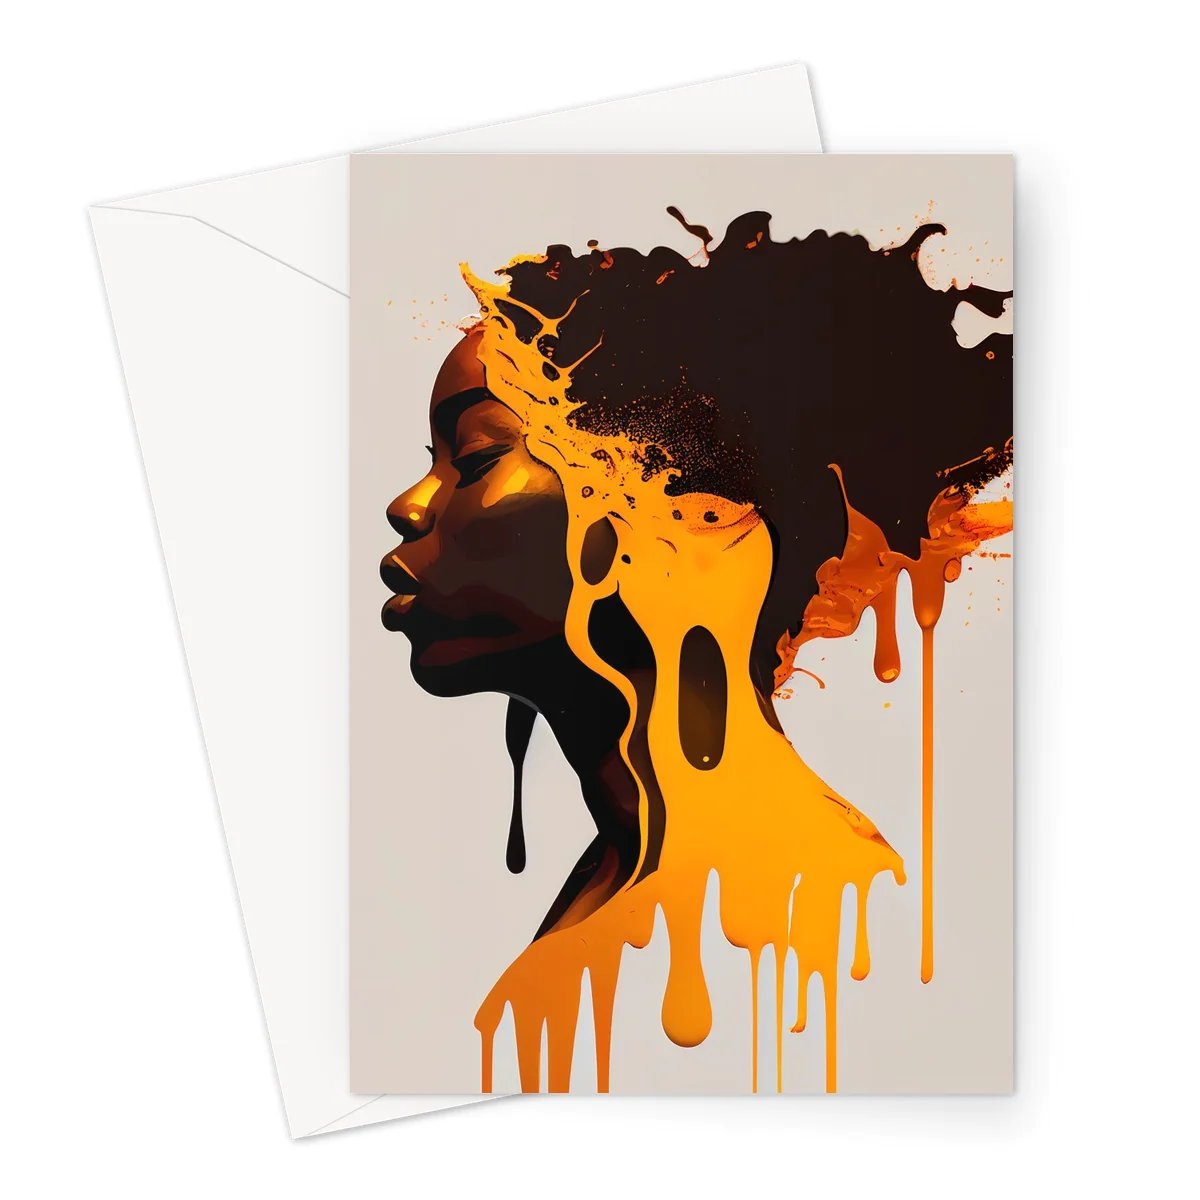 Able - Black Greeting Card